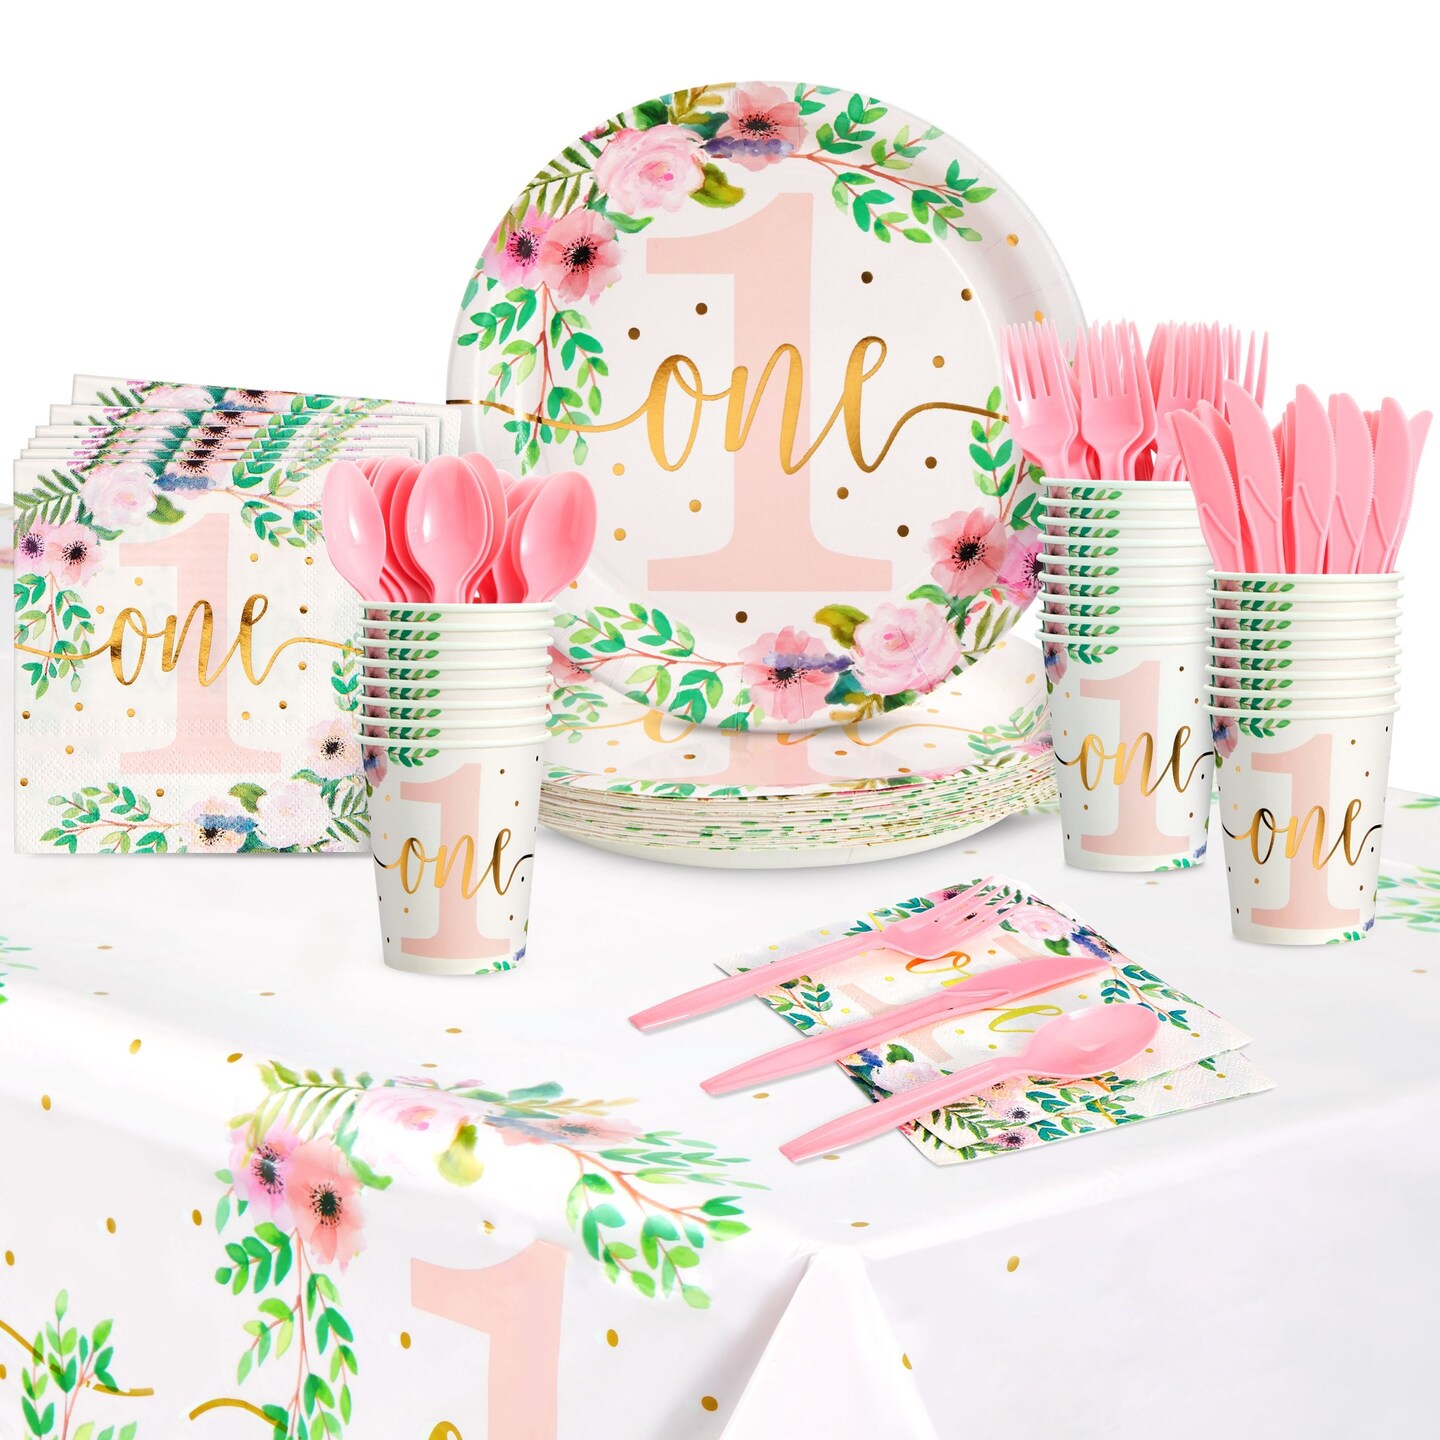 Party Themes & Ideas - Miss Onederful Birthday Party - Design My Party  Studio